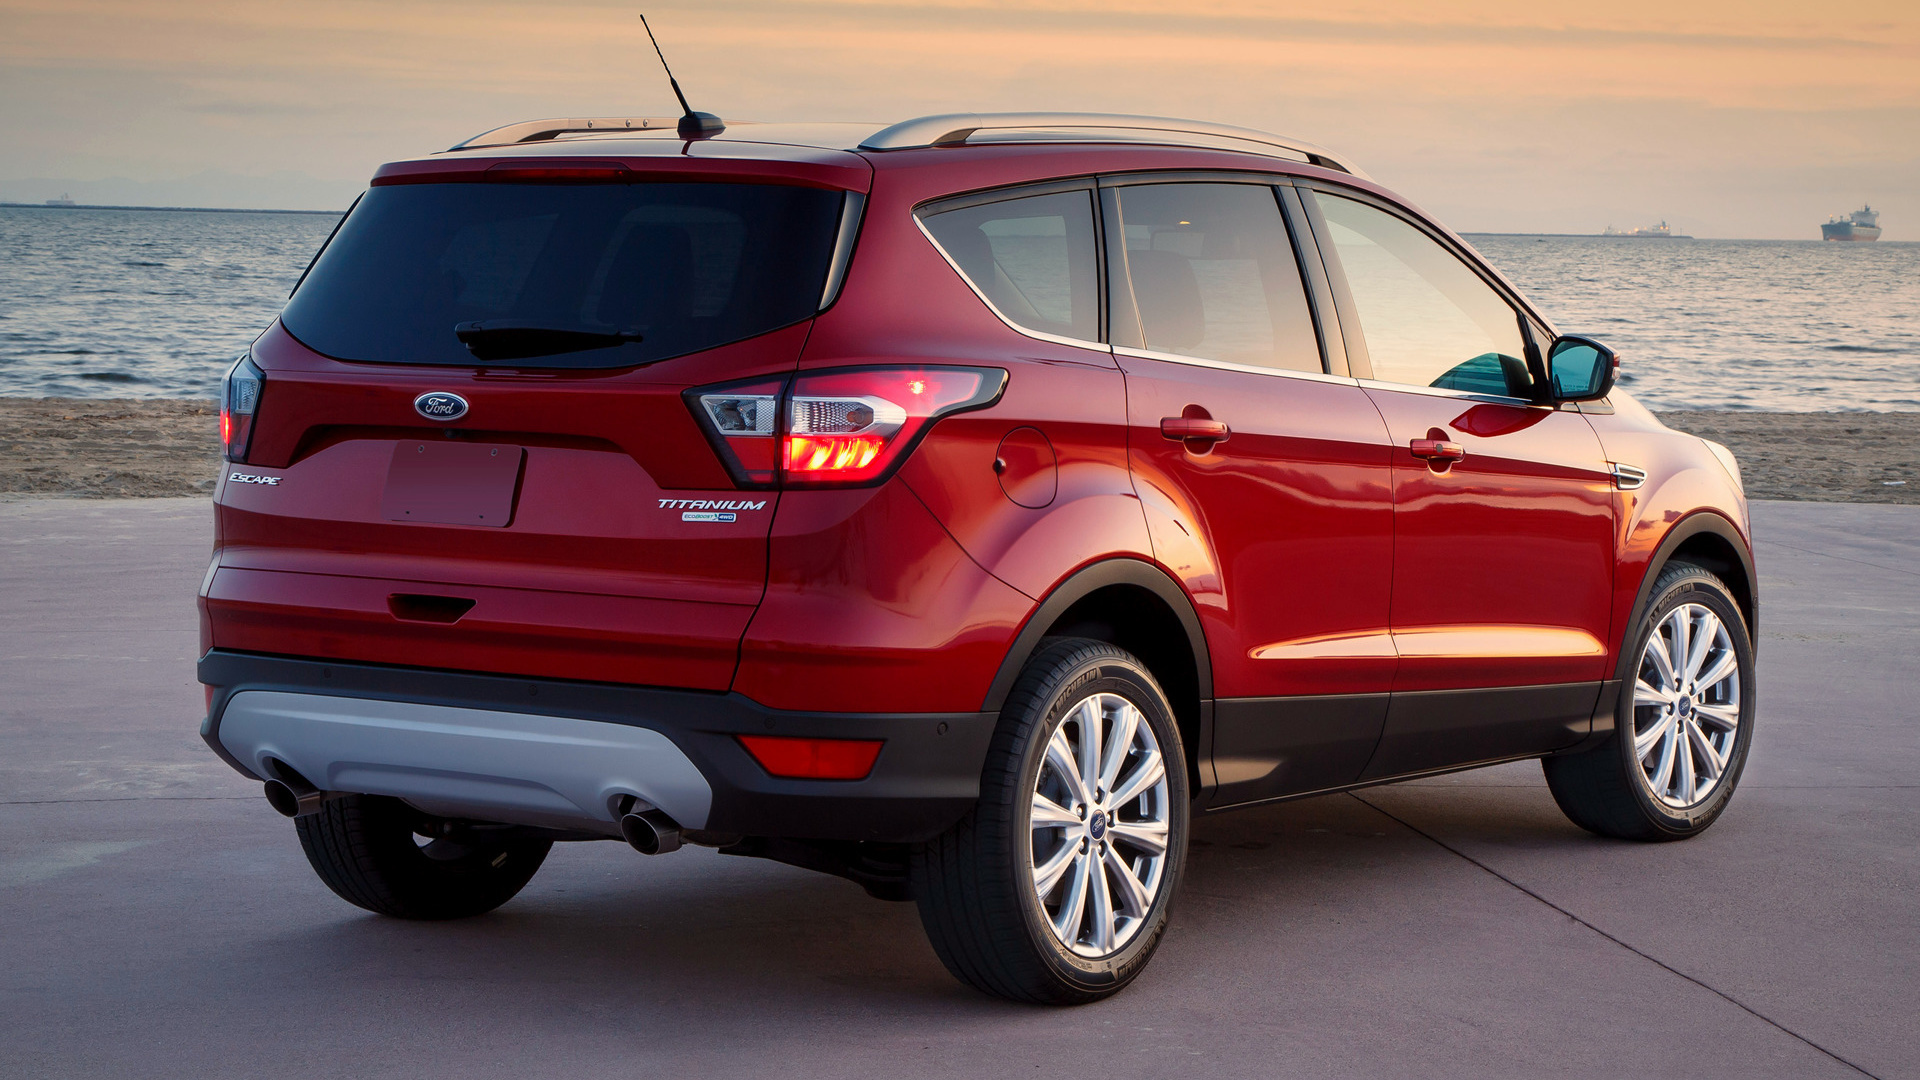 Ford Escape, Striking beauty, Exceptional features, Unmatched versatility, 1920x1080 Full HD Desktop